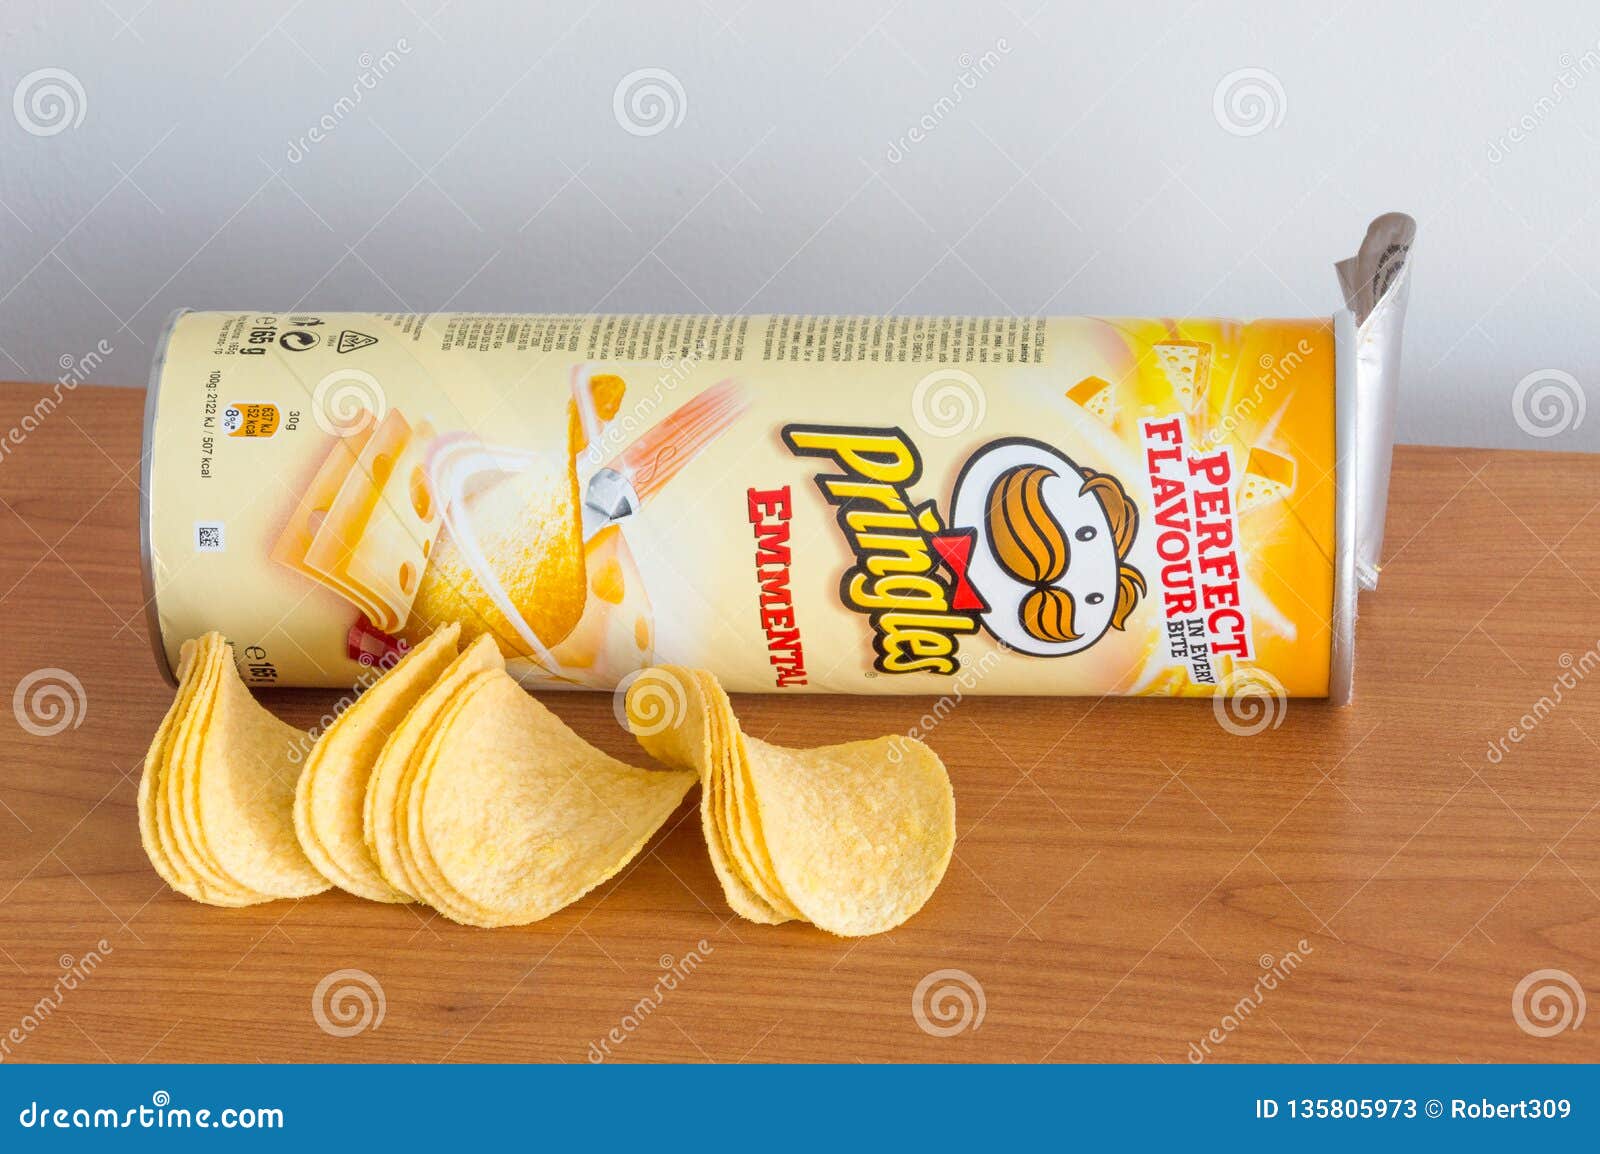 Open Tube Of Pringles Chips With Pingles Chips On The Table Editorial Stock Photo Image Of Emmental Open 135805973,How To Get Rid Of Black Ants At Home